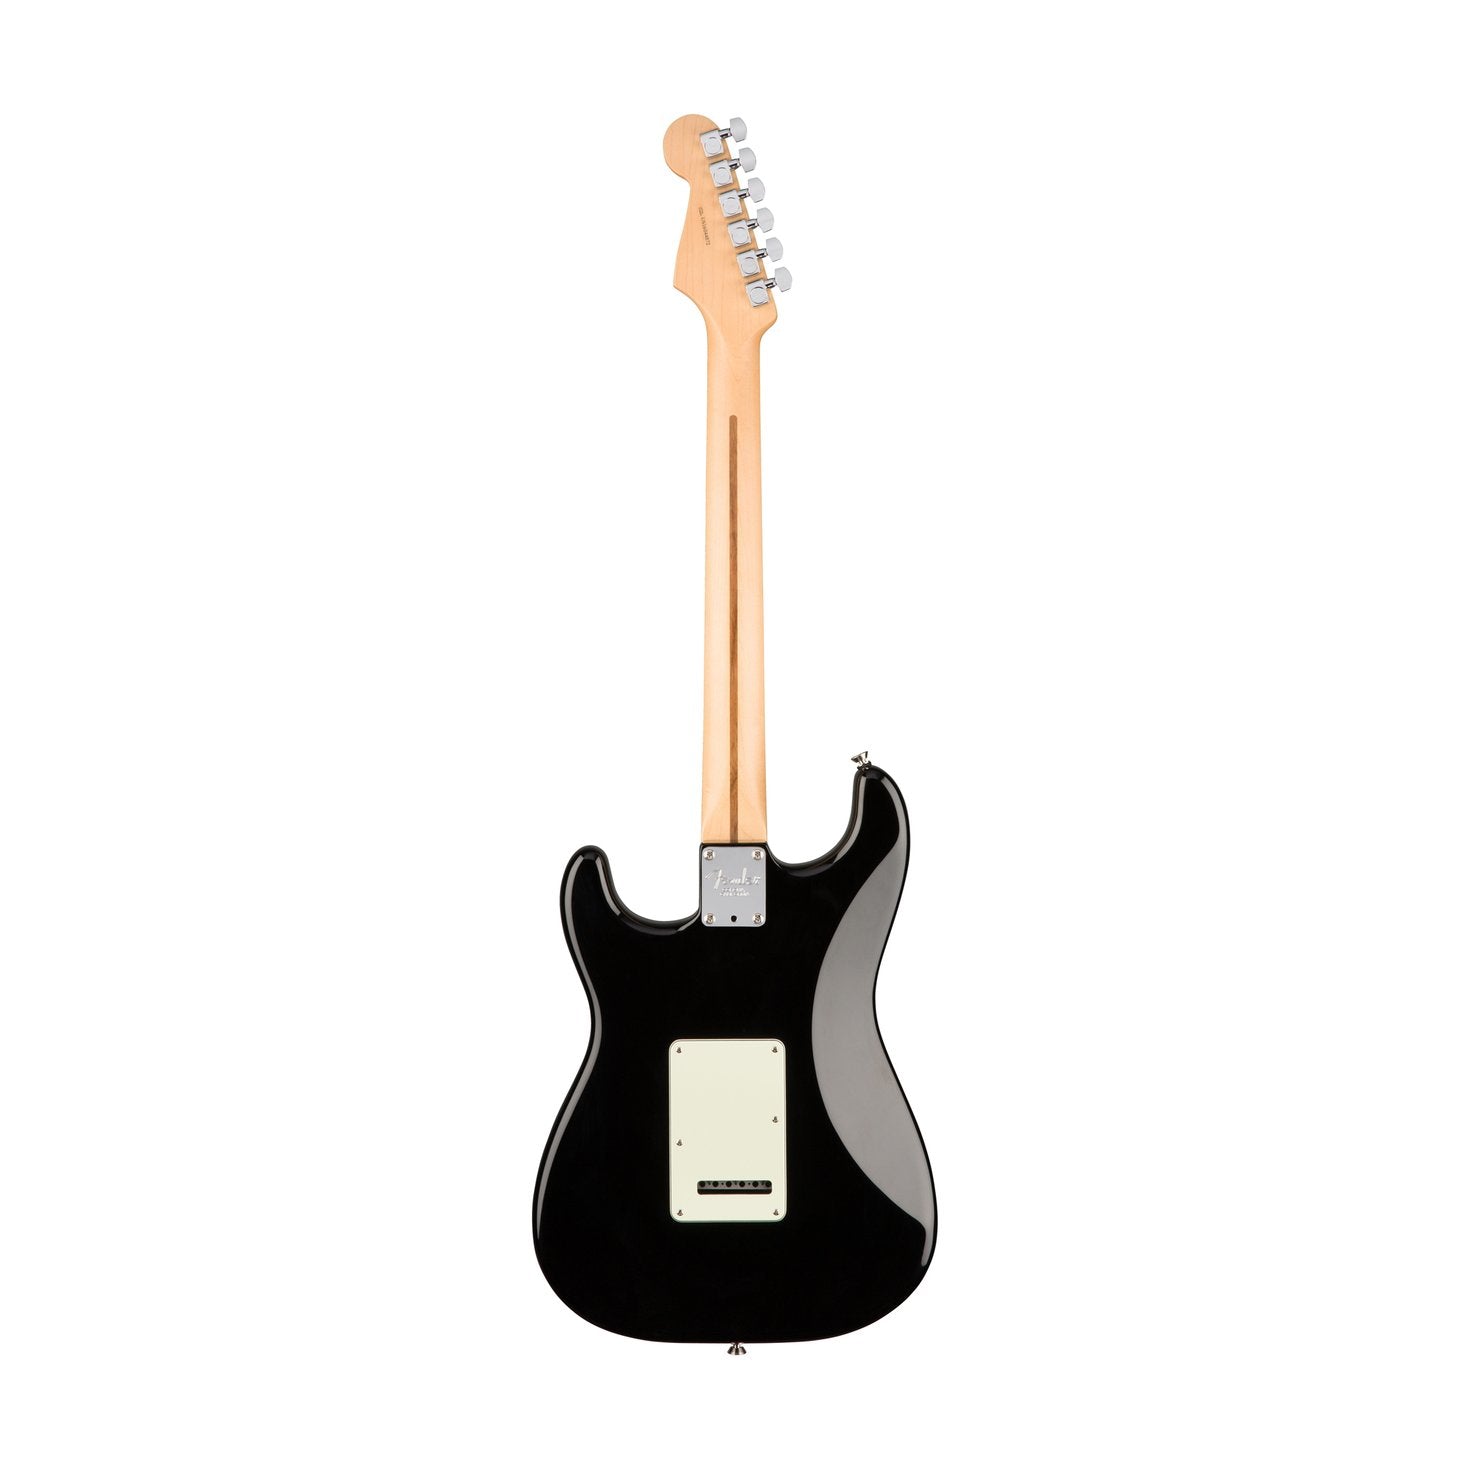 Fender American Professional Stratocaster Electric Guitar, Maple FB, Black, FENDER, ELECTRIC GUITAR, fender-electric-guitar-f03-011-3012-706, ZOSO MUSIC SDN BHD